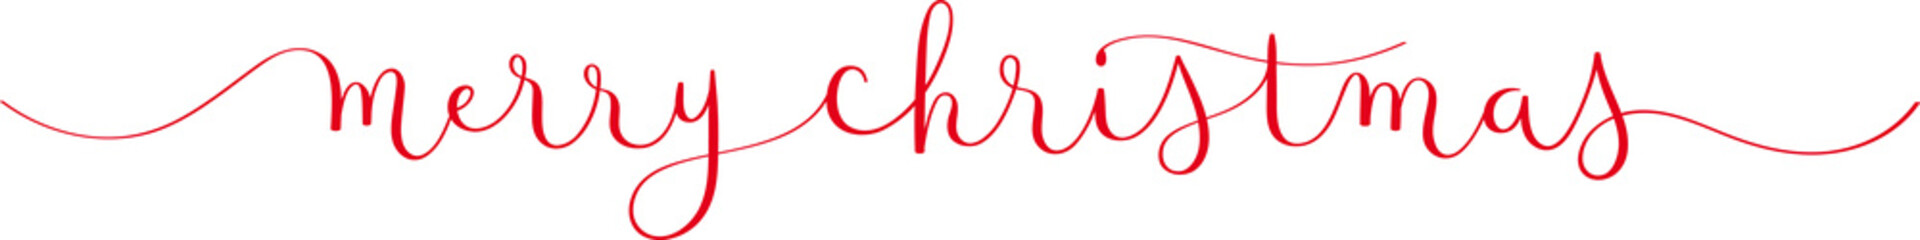 MERRY CHRISTMAS red brush calligraphy banner with swashes on transparent background